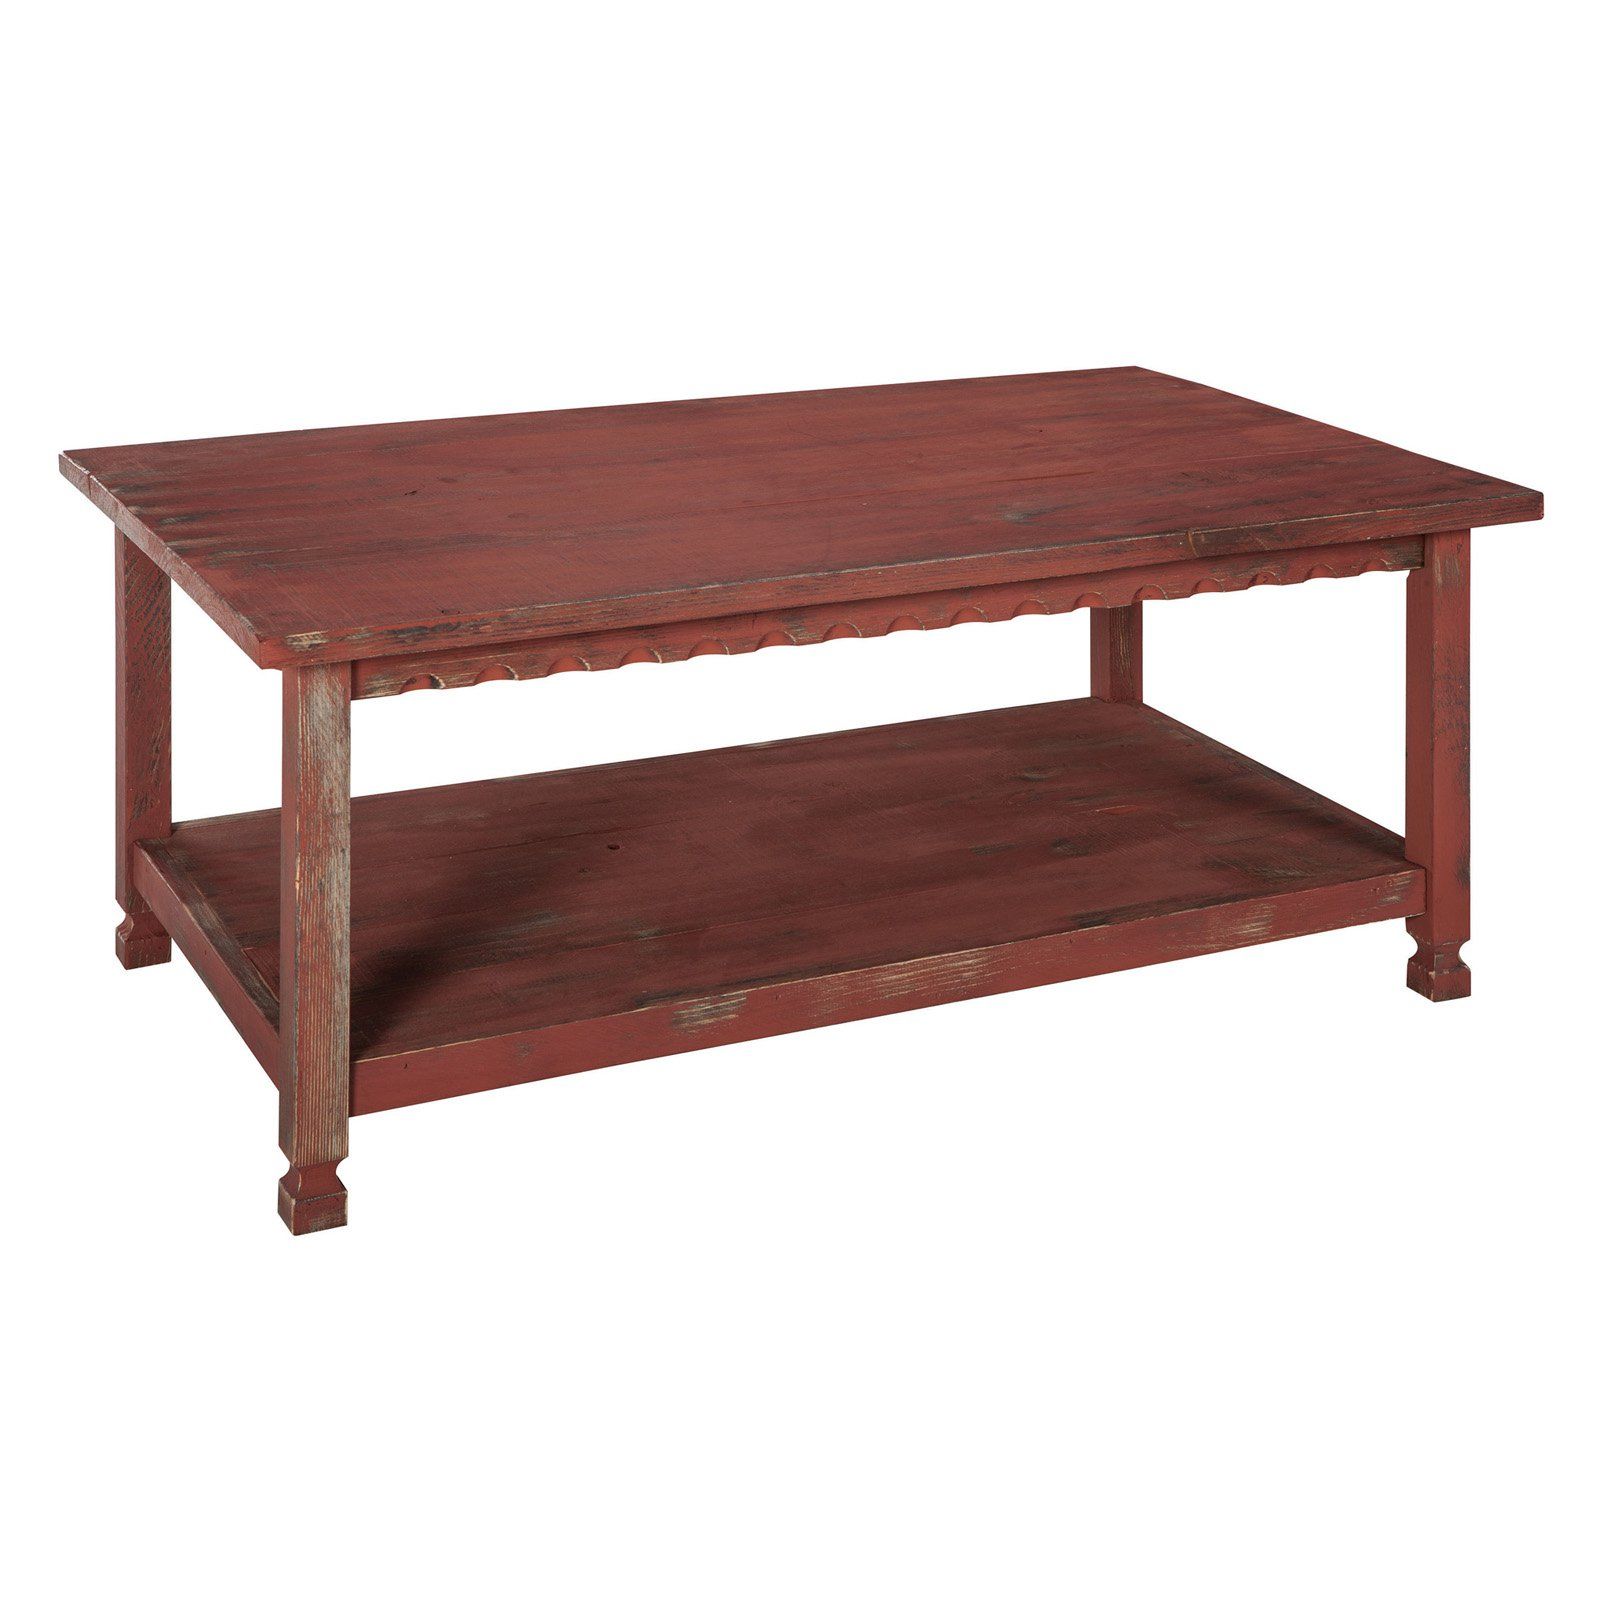 Well Liked Alaterre Country Cottage Wooden Long Coffee Tables Throughout Alaterre Country Cottage 42"l Coffee Table, Blue Antique Finish (View 7 of 20)